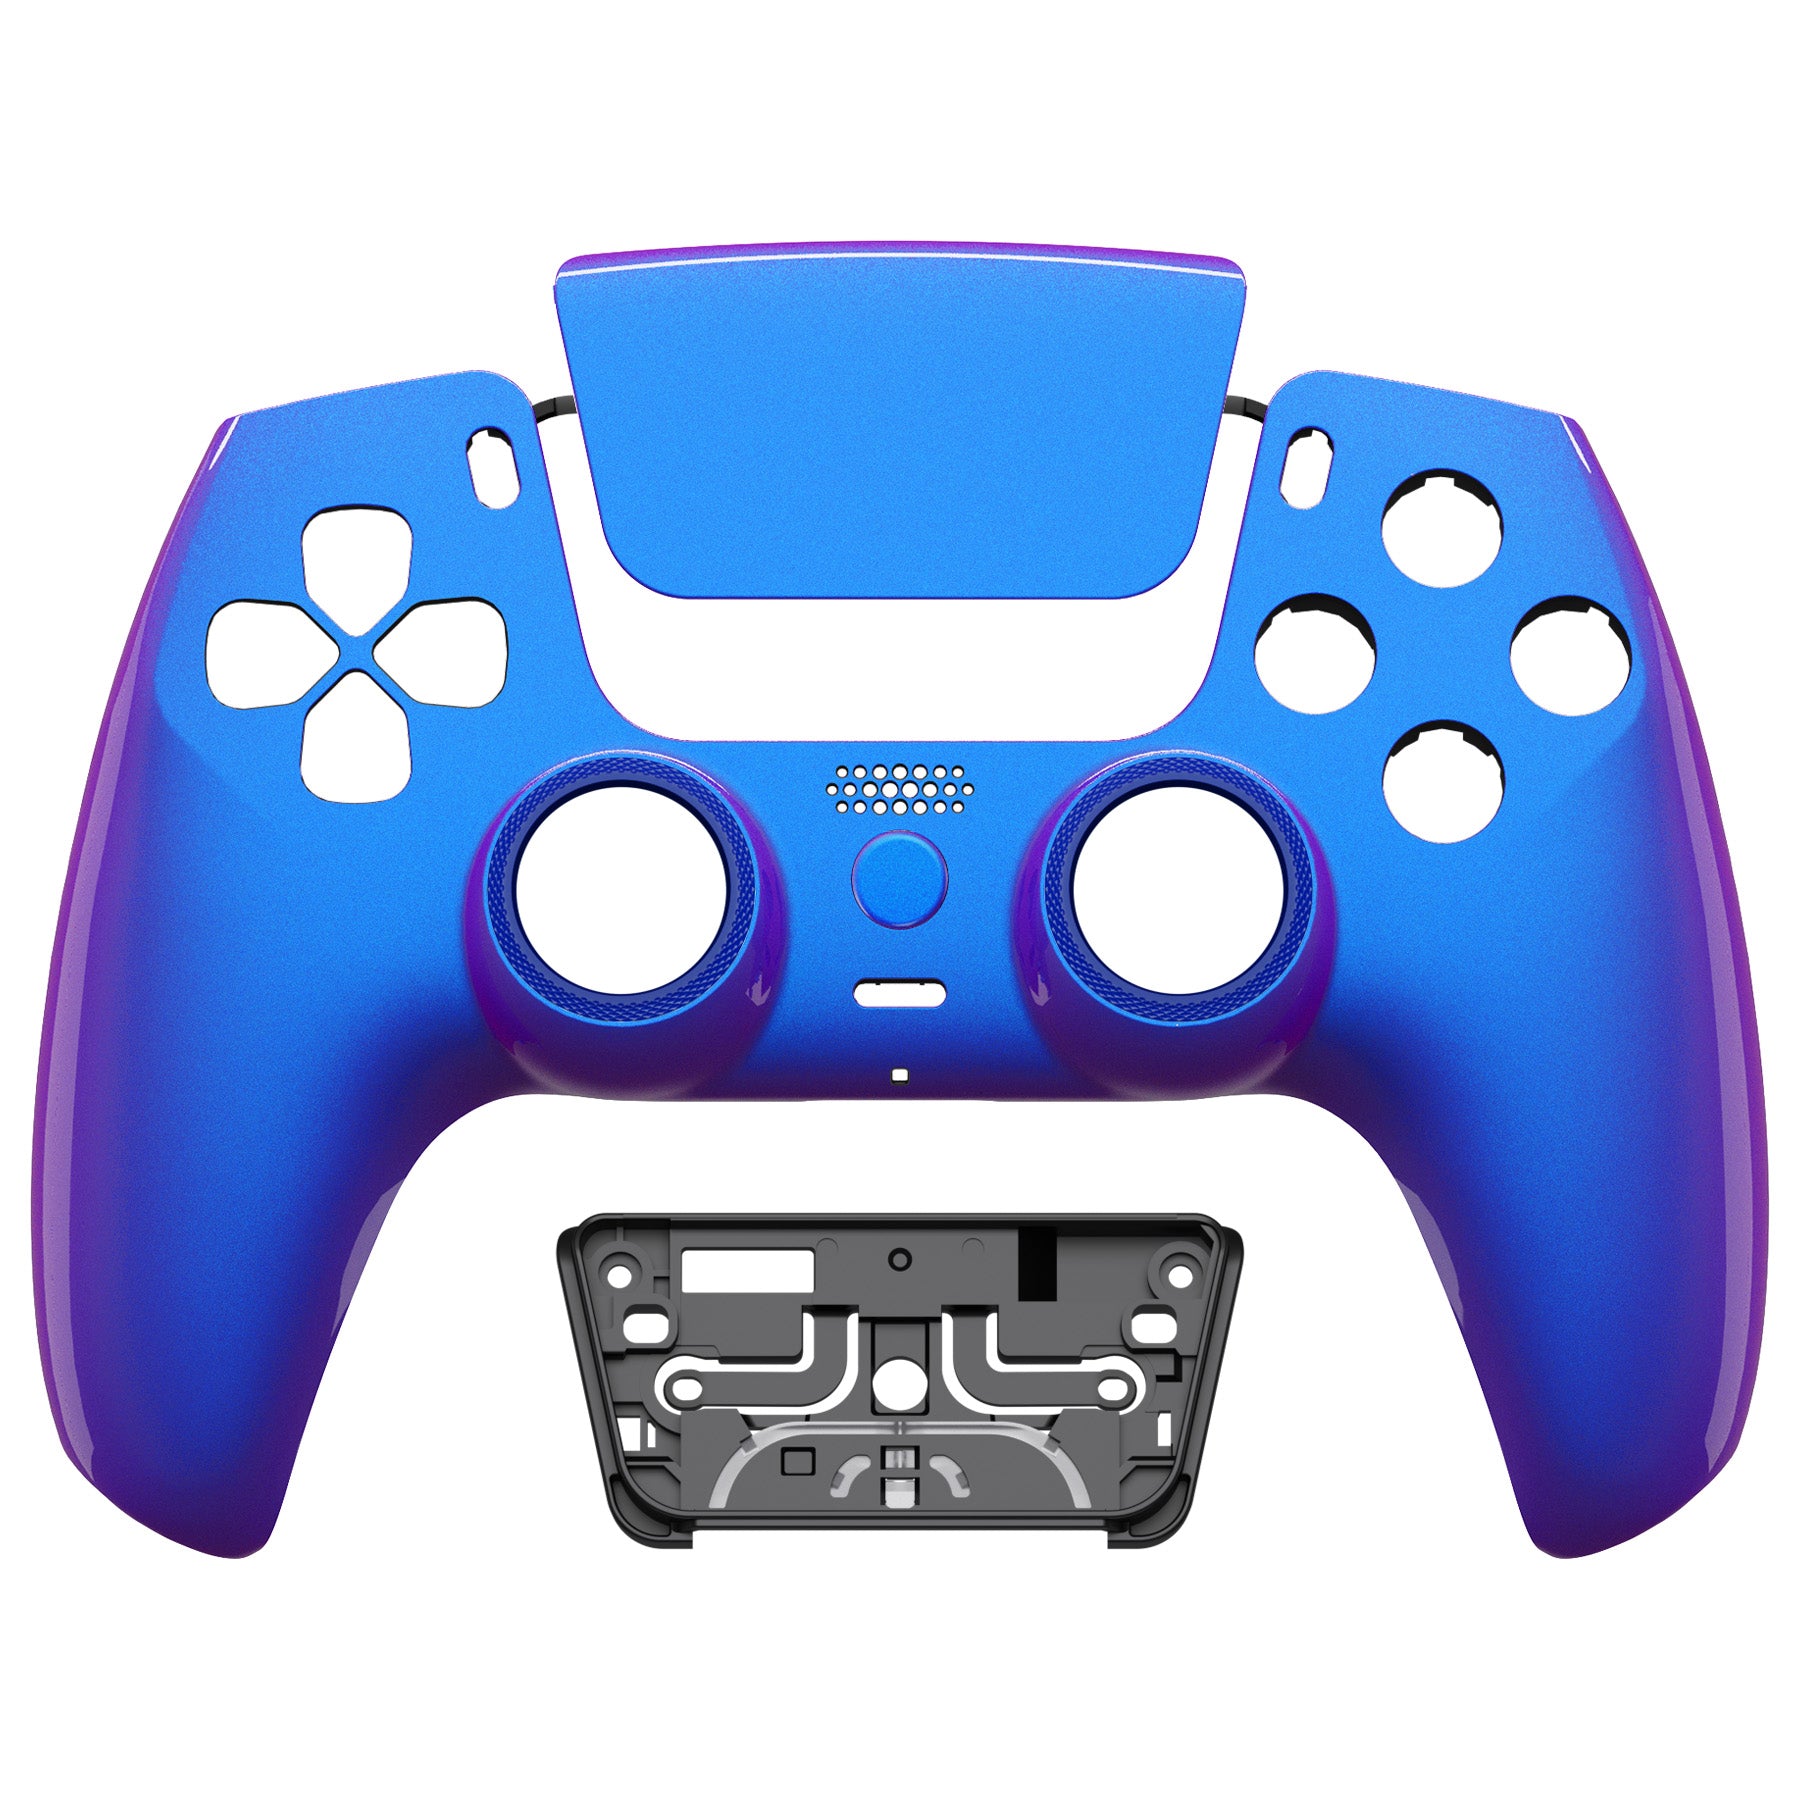 eXtremeRate LUNA Redesigned Replacement Front Shell with Touchpad  Compatible with PS5 Controller BDM-010/020/030/040 - Chameleon Purple Blue